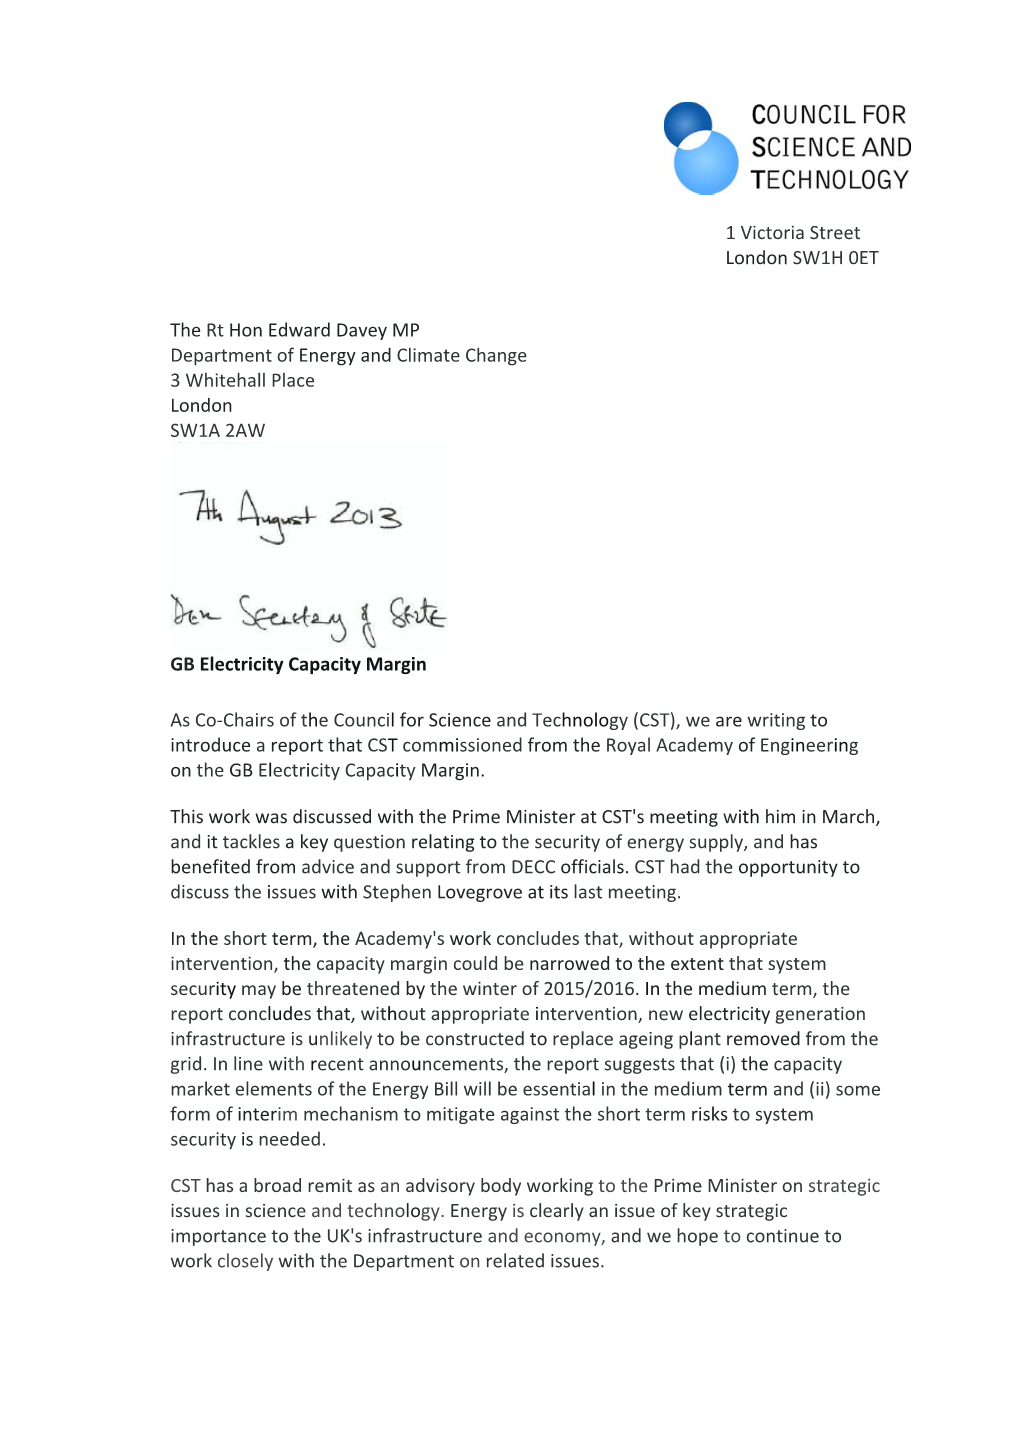 GB Electricity Capacity Margins Letter